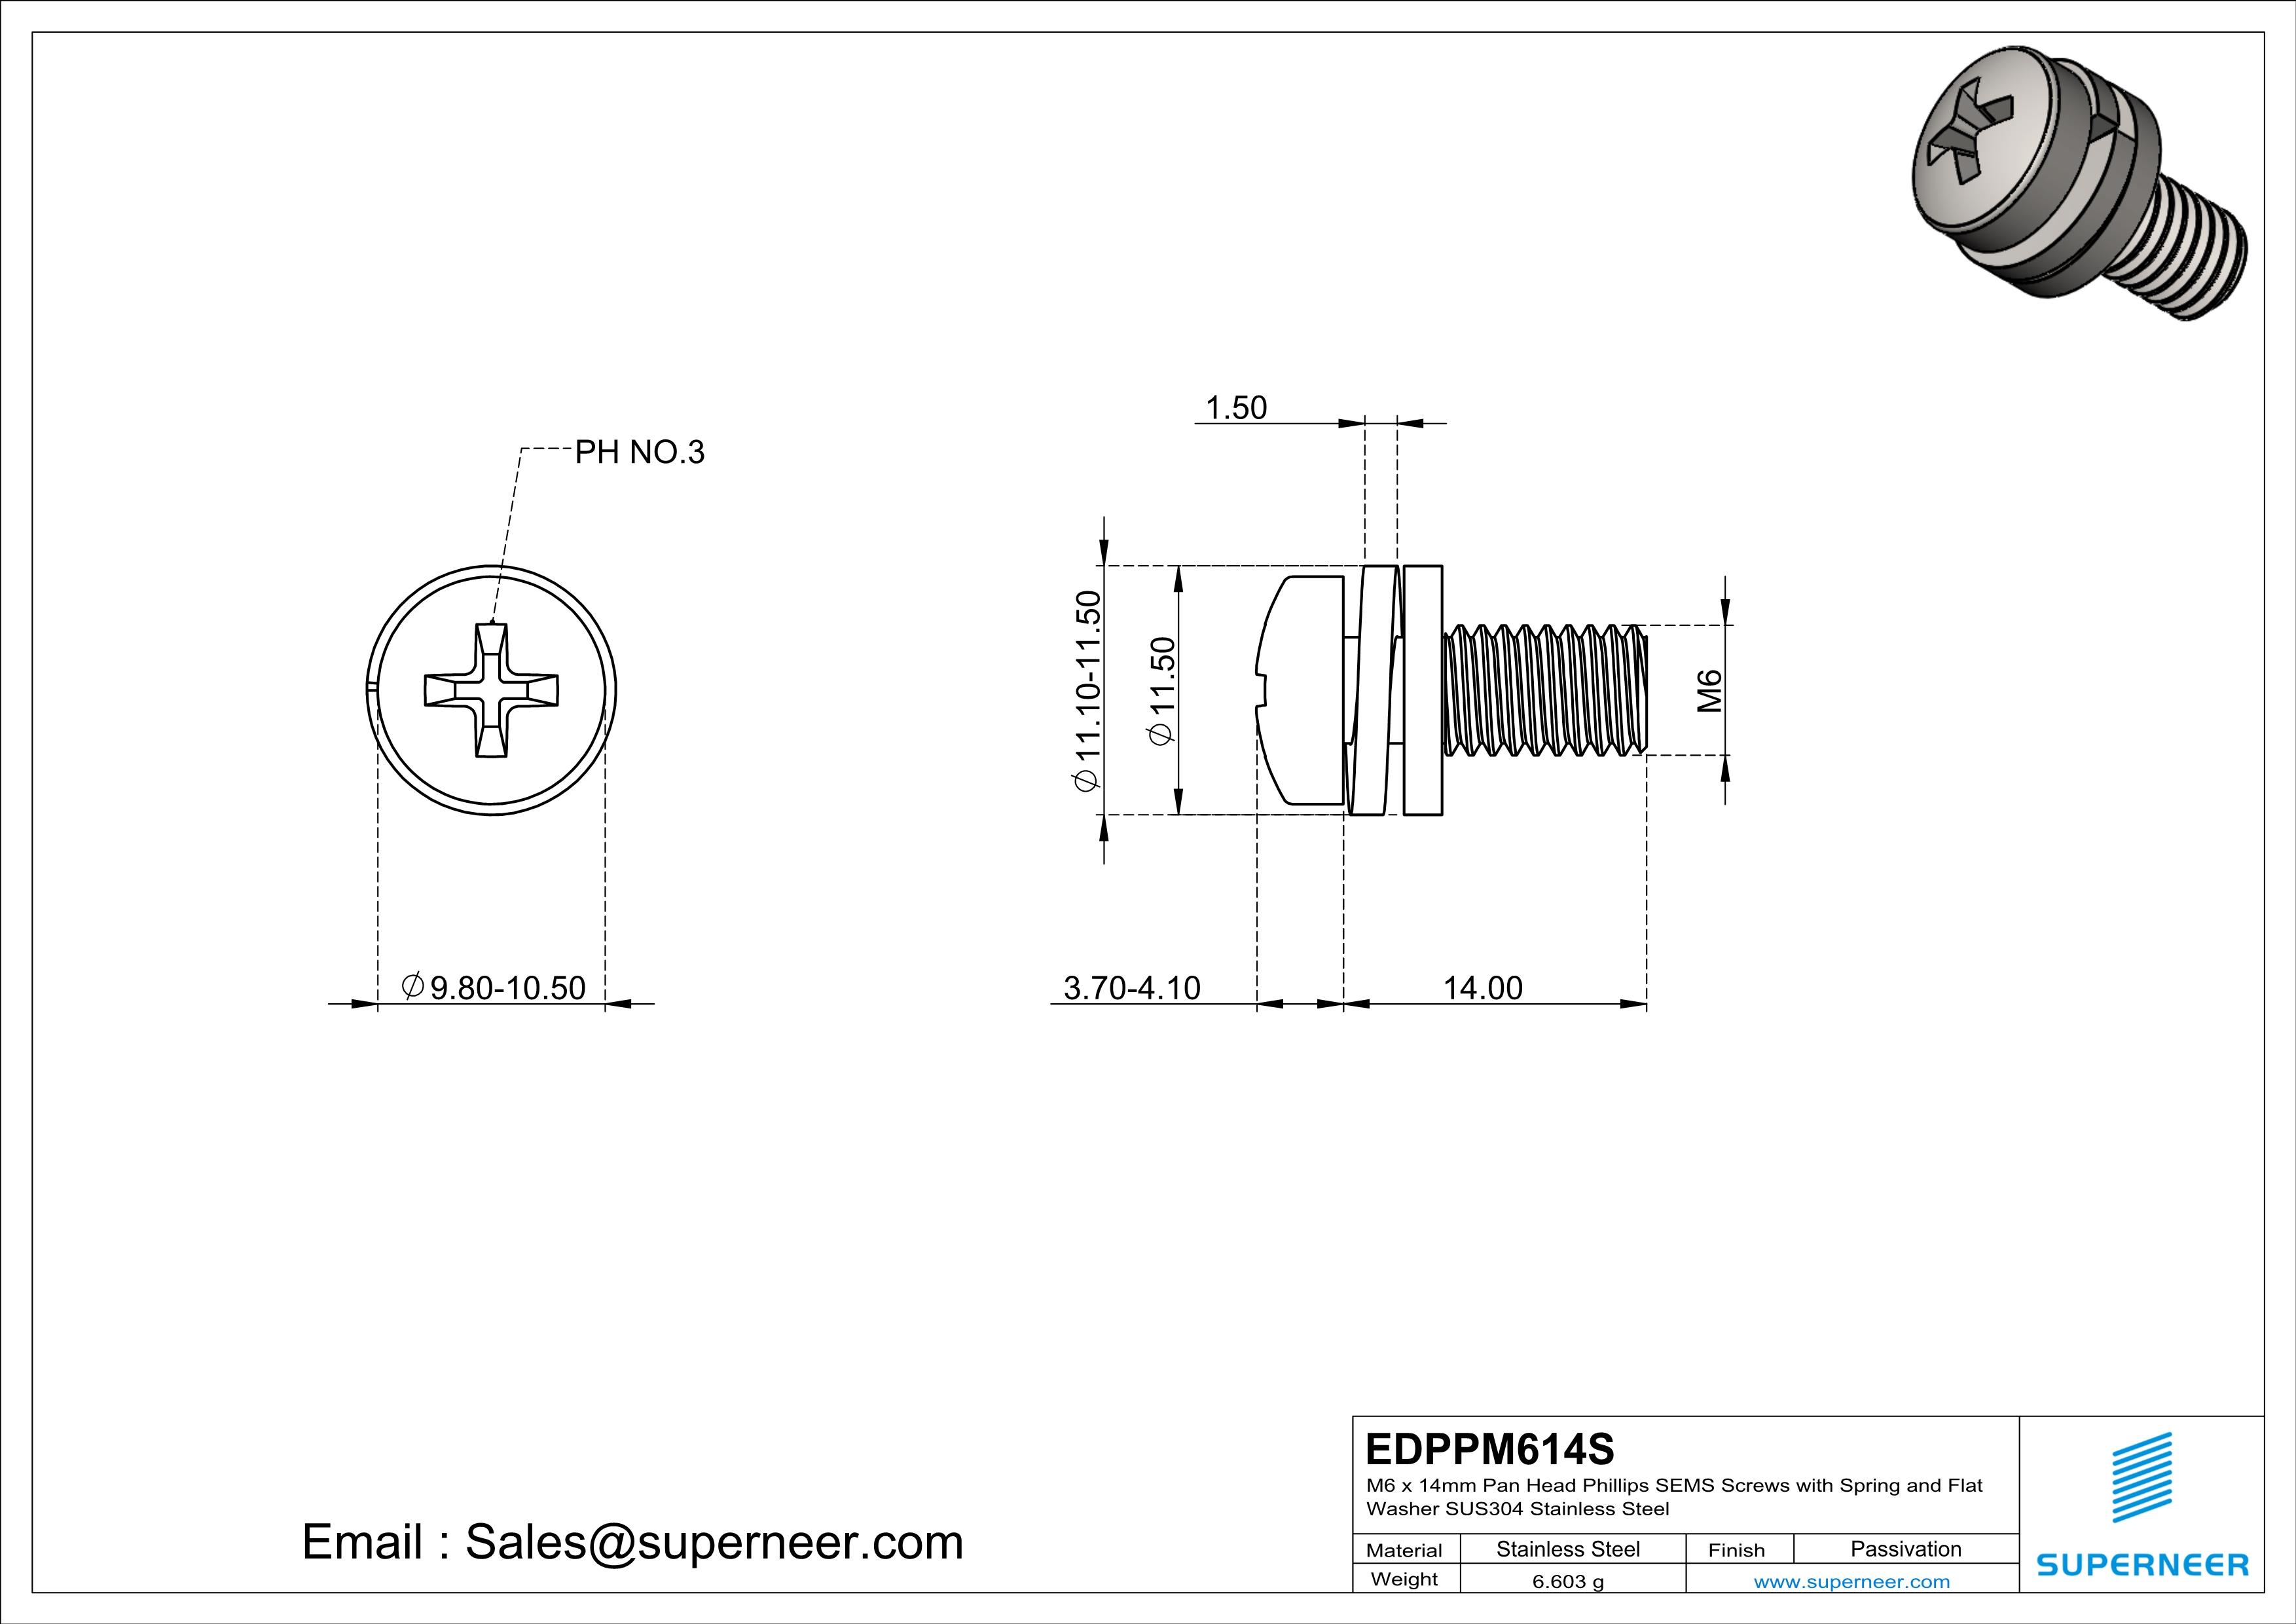 M6 x 14mm Pan Head Phillips SEMS Screws with Spring and Flat Washer SUS304 Stainless Steel Inox